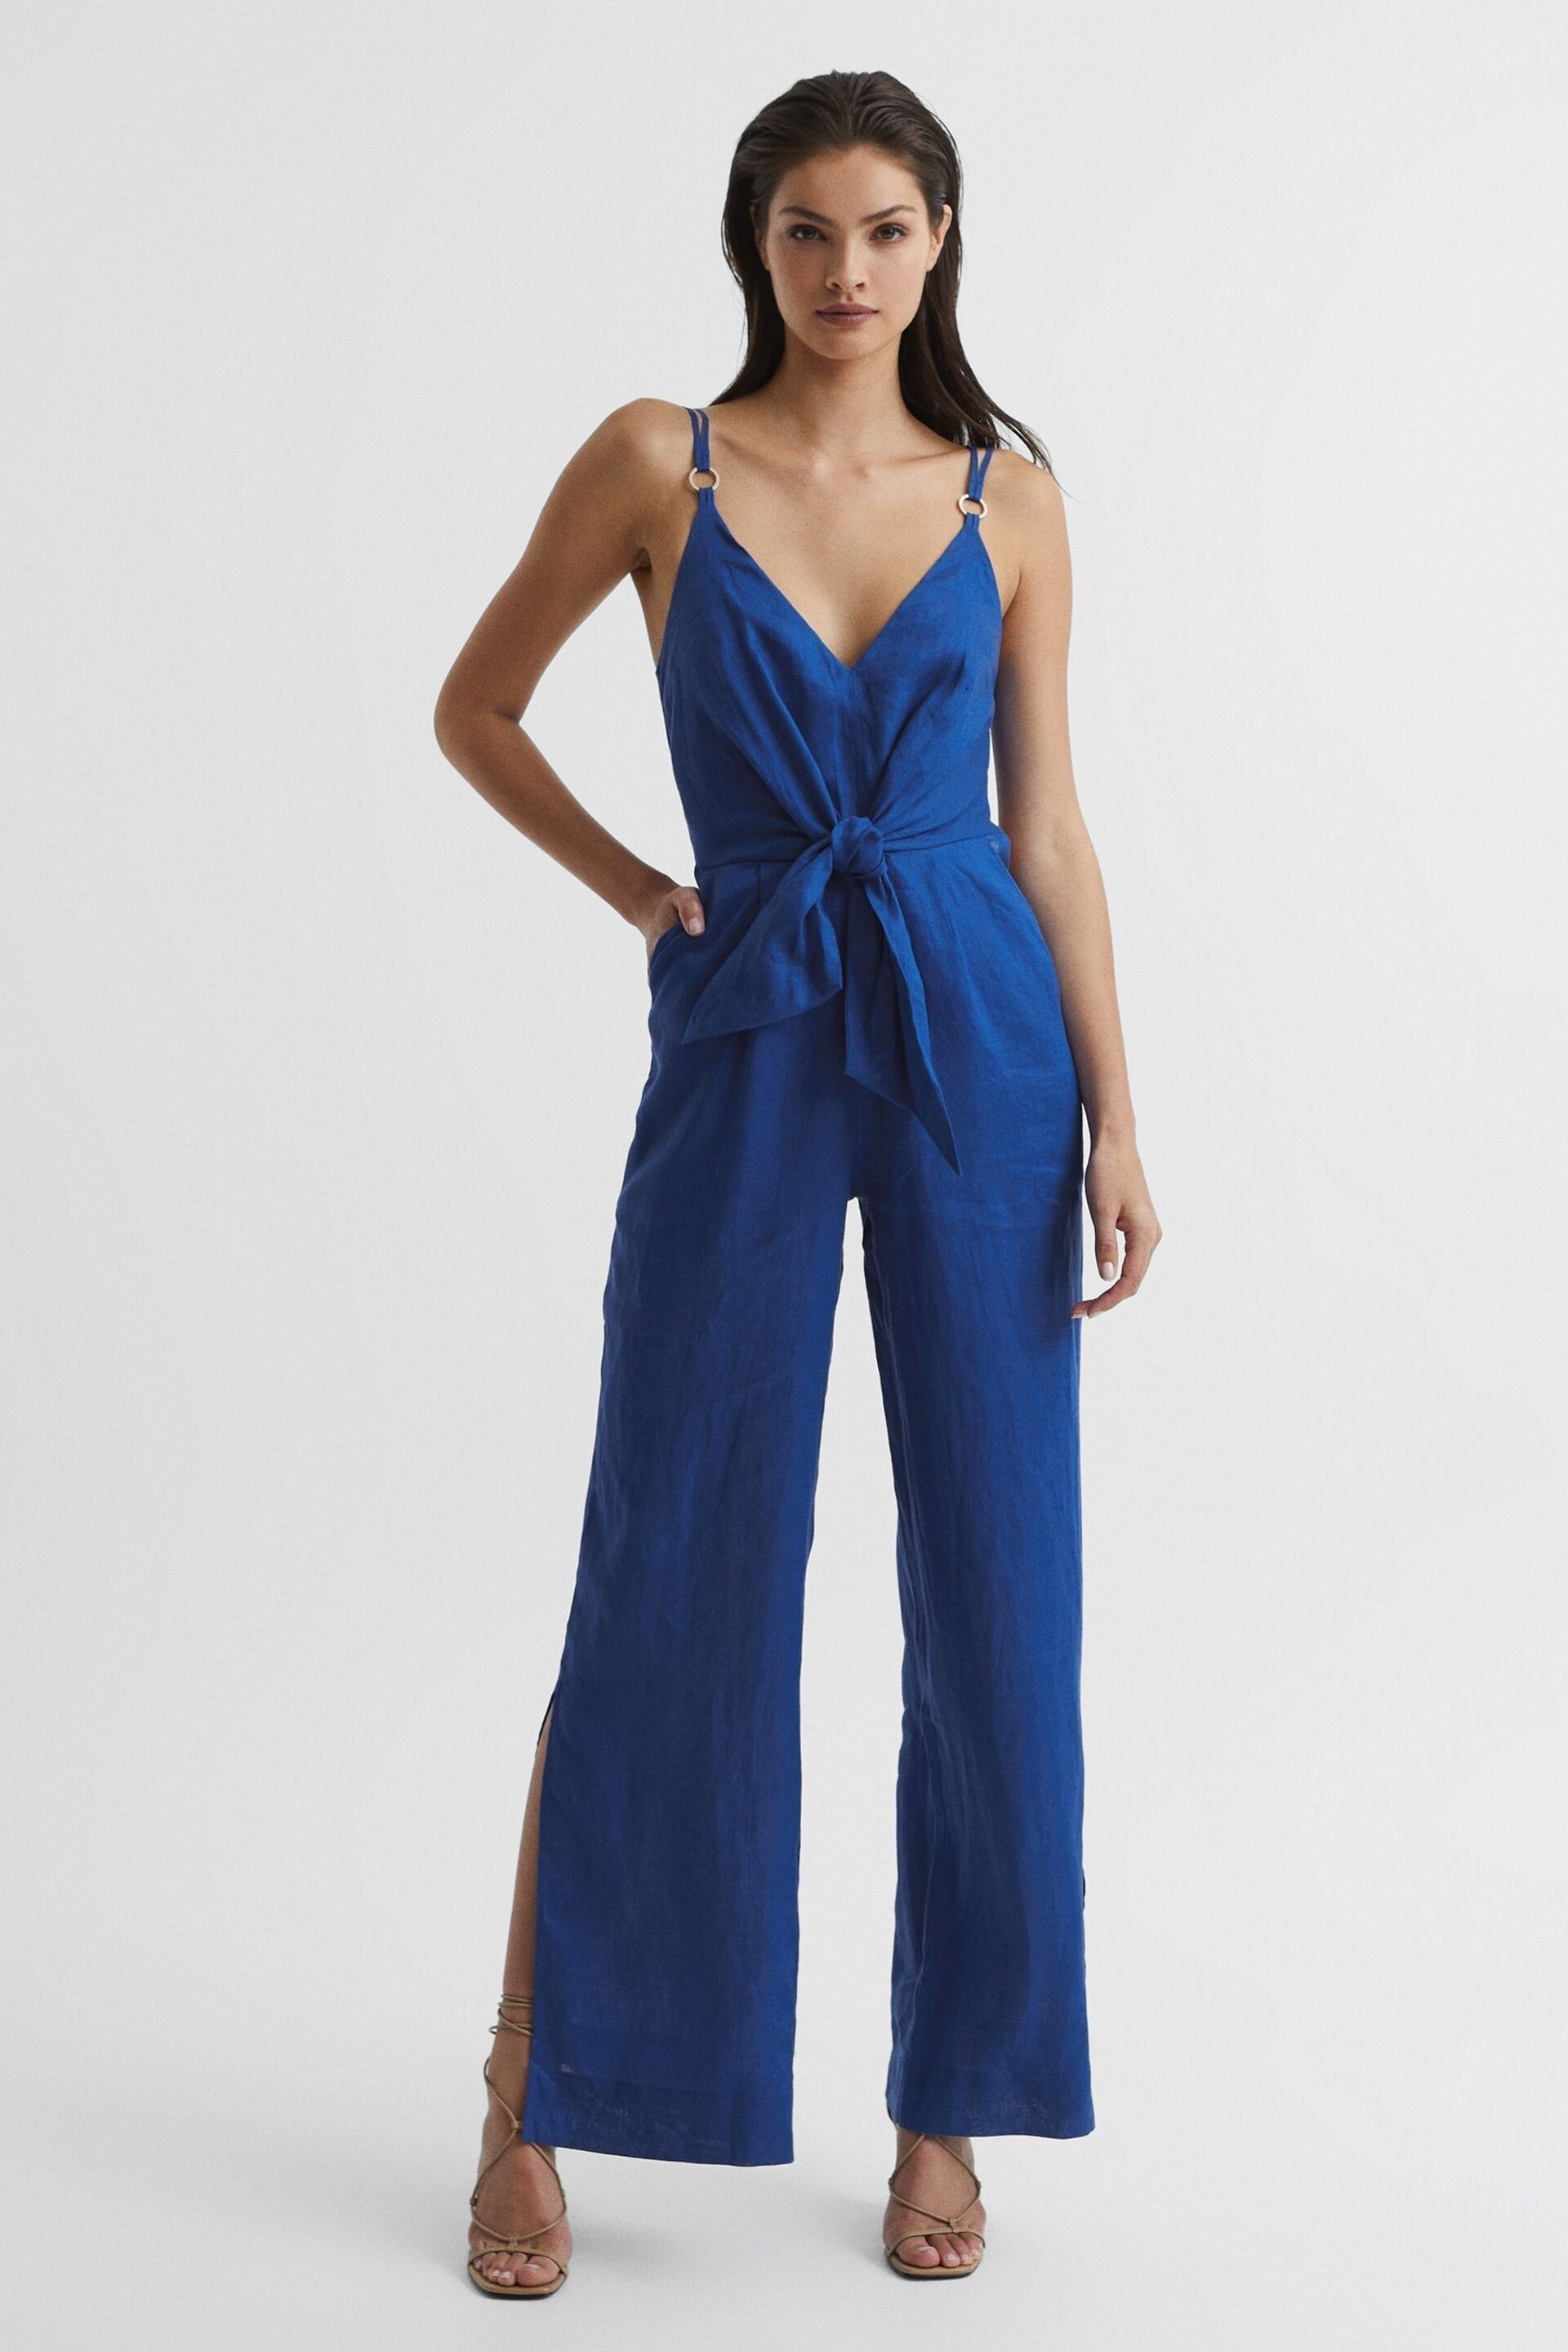 Reiss Bright Blue Ana Linen Jumpsuit - Image 1 of 7